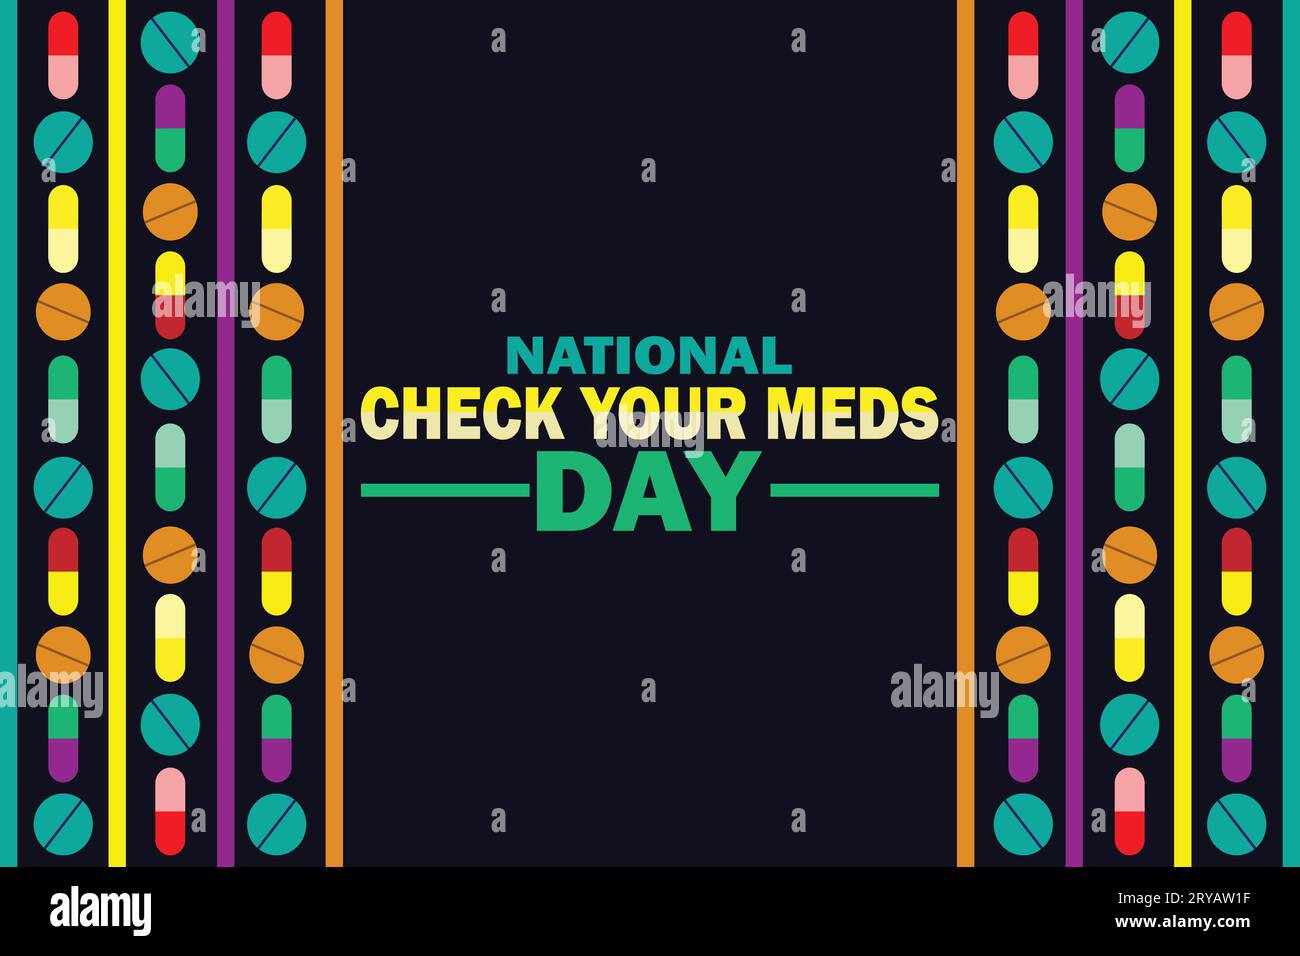 National Check Your Meds Day Vector illustration. Health concept. Template for background, banner, card, poster with text inscription. Stock Vector